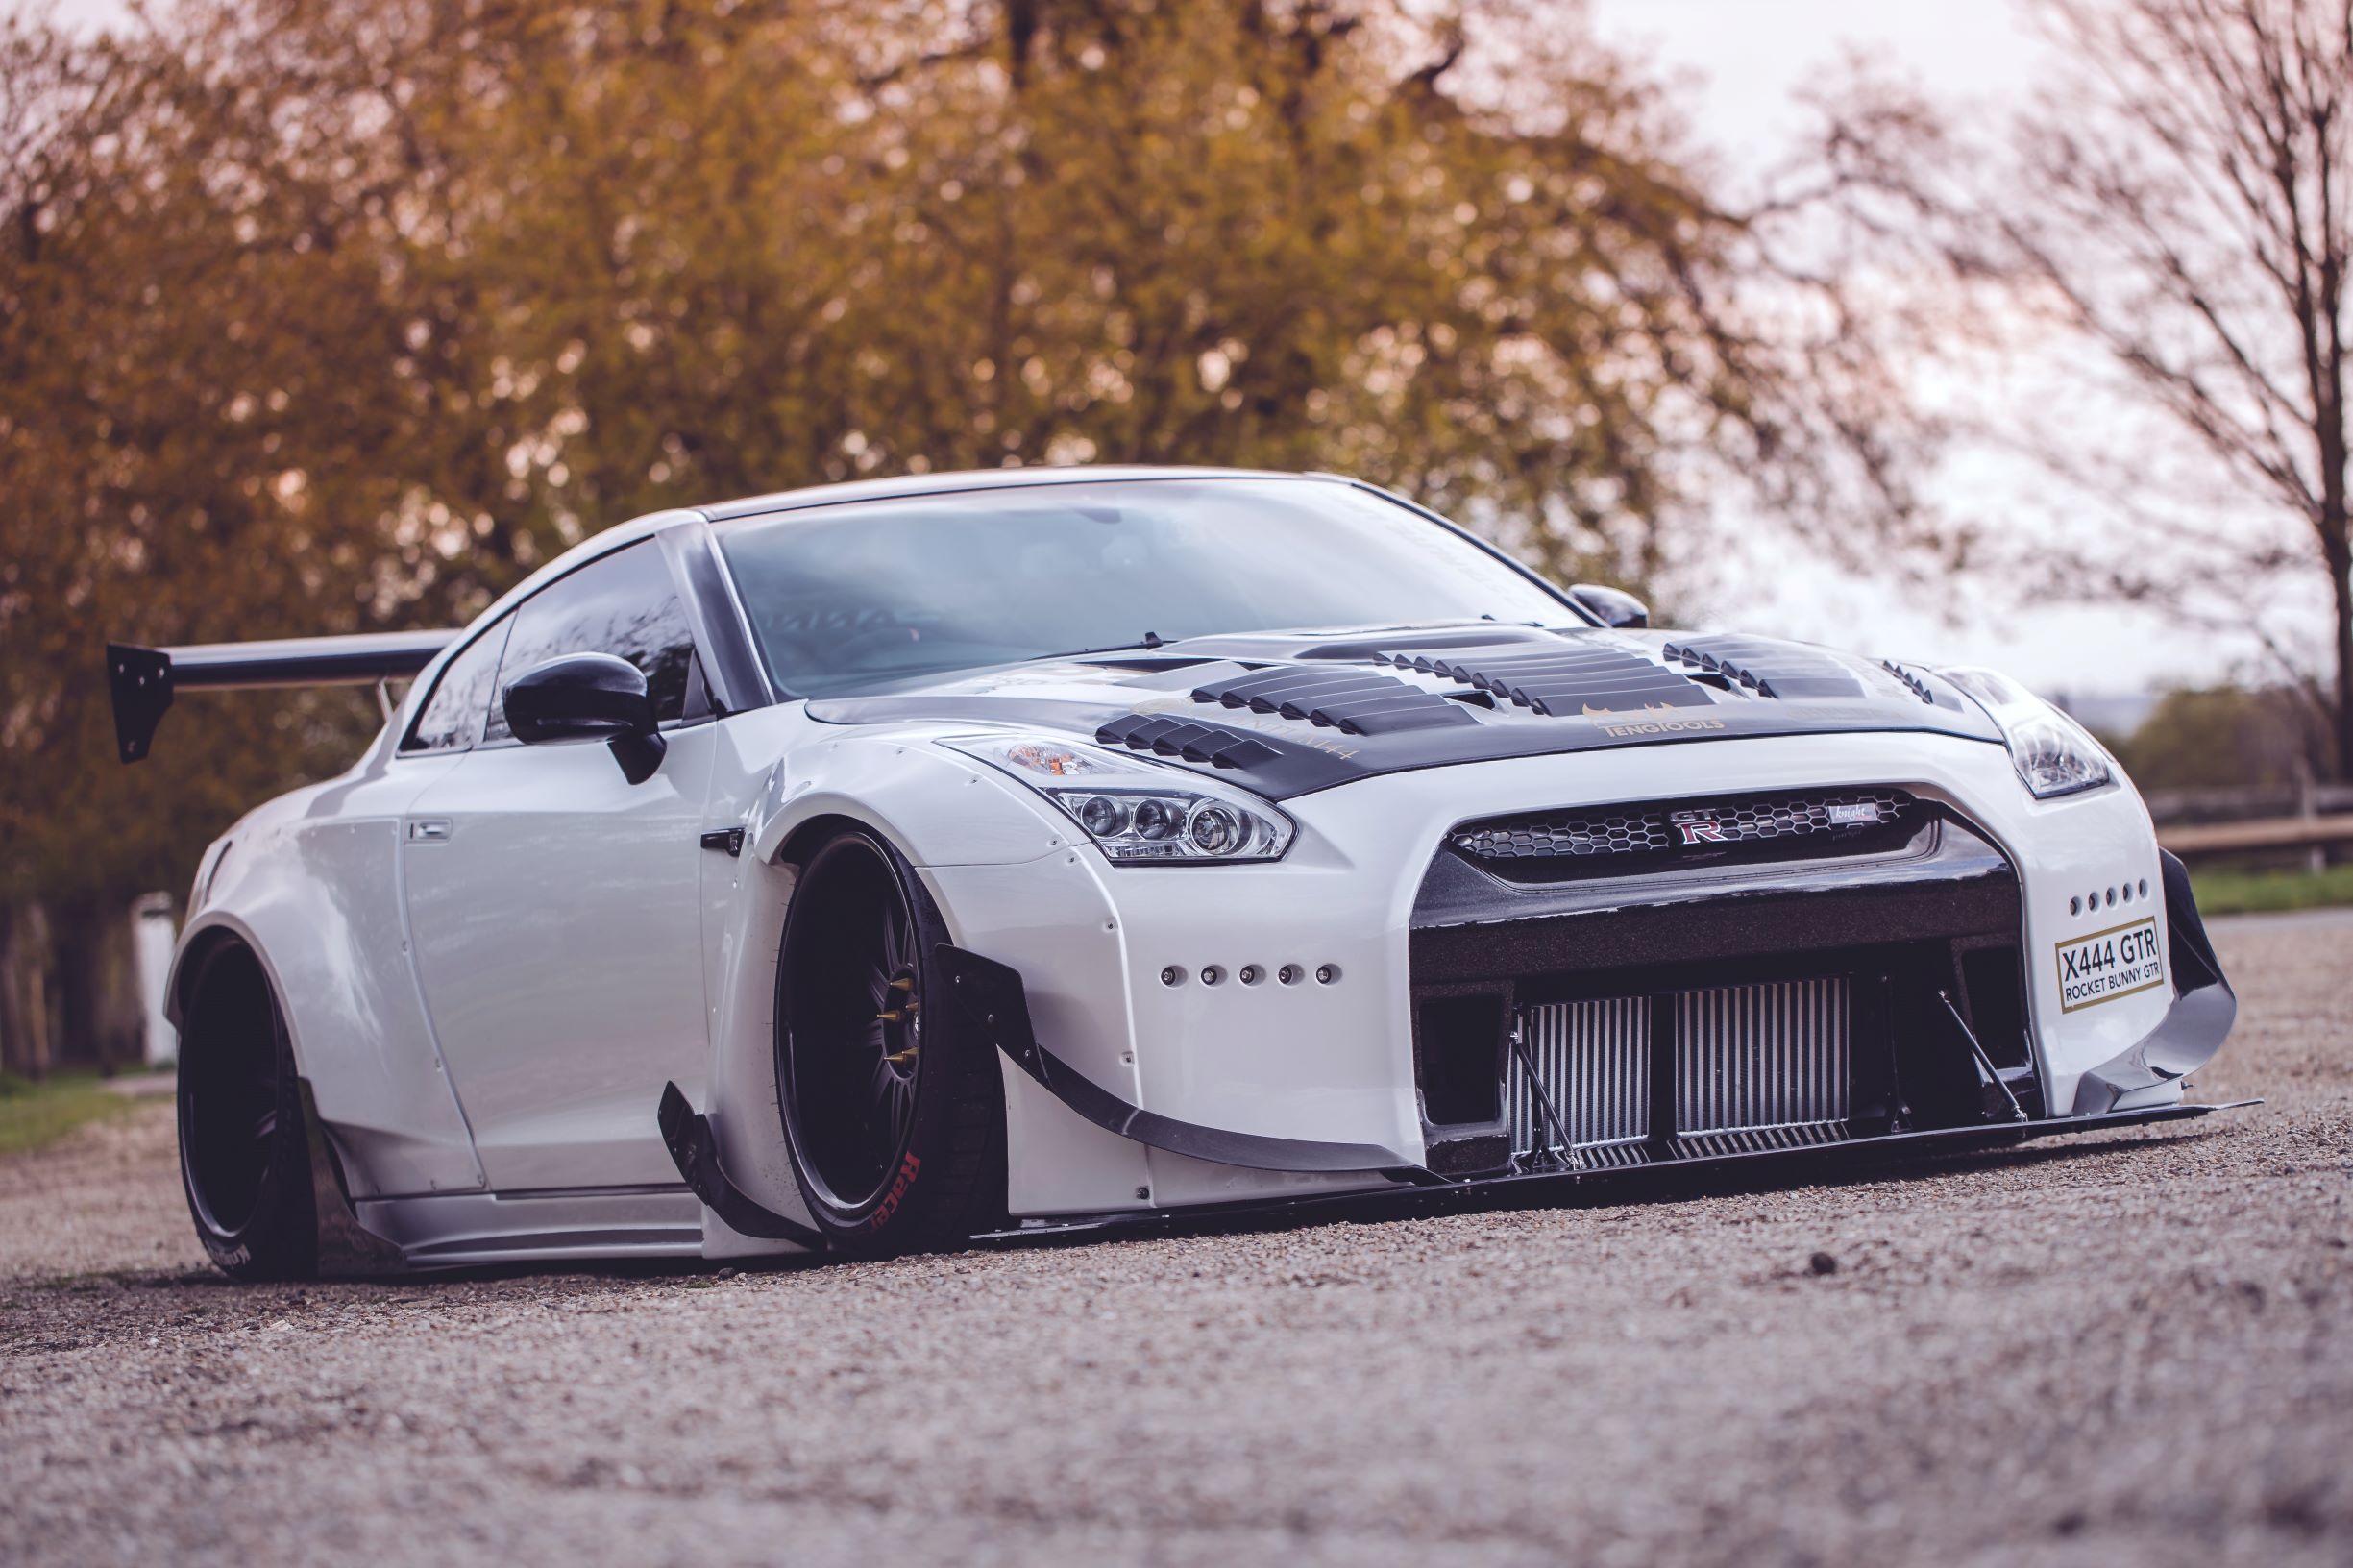 Starlite Limos' black-and-white R35 Nissan GT-R with a Rocket Bunny body kit parked in an English countryside manor garden